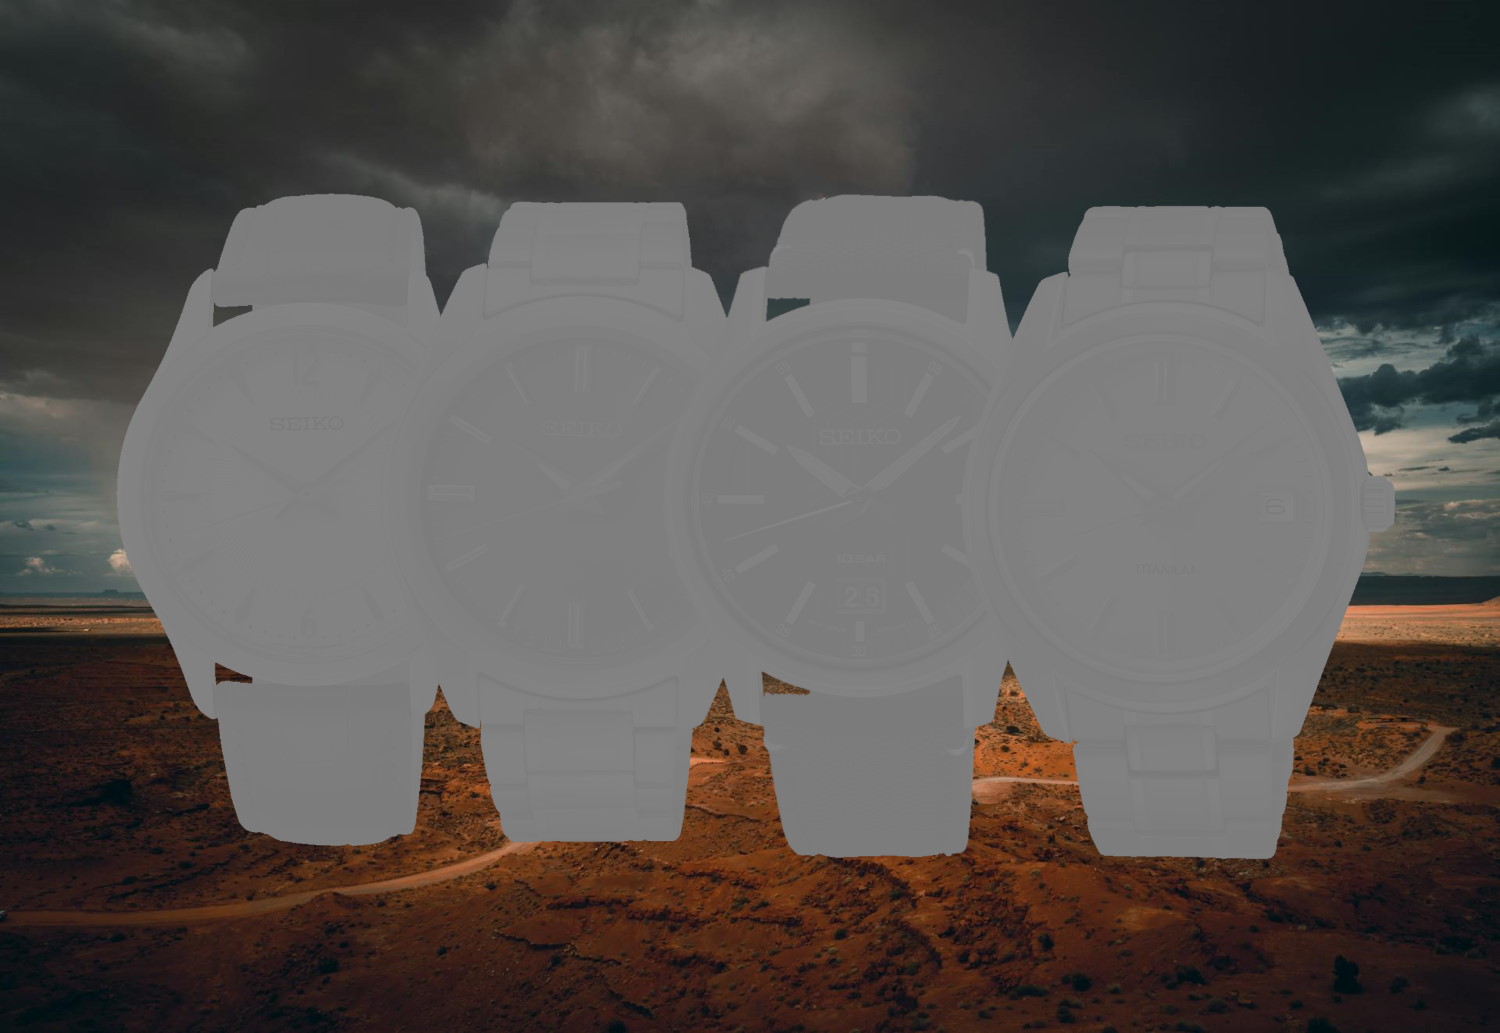 4 Seiko watches in black and white on a desert background